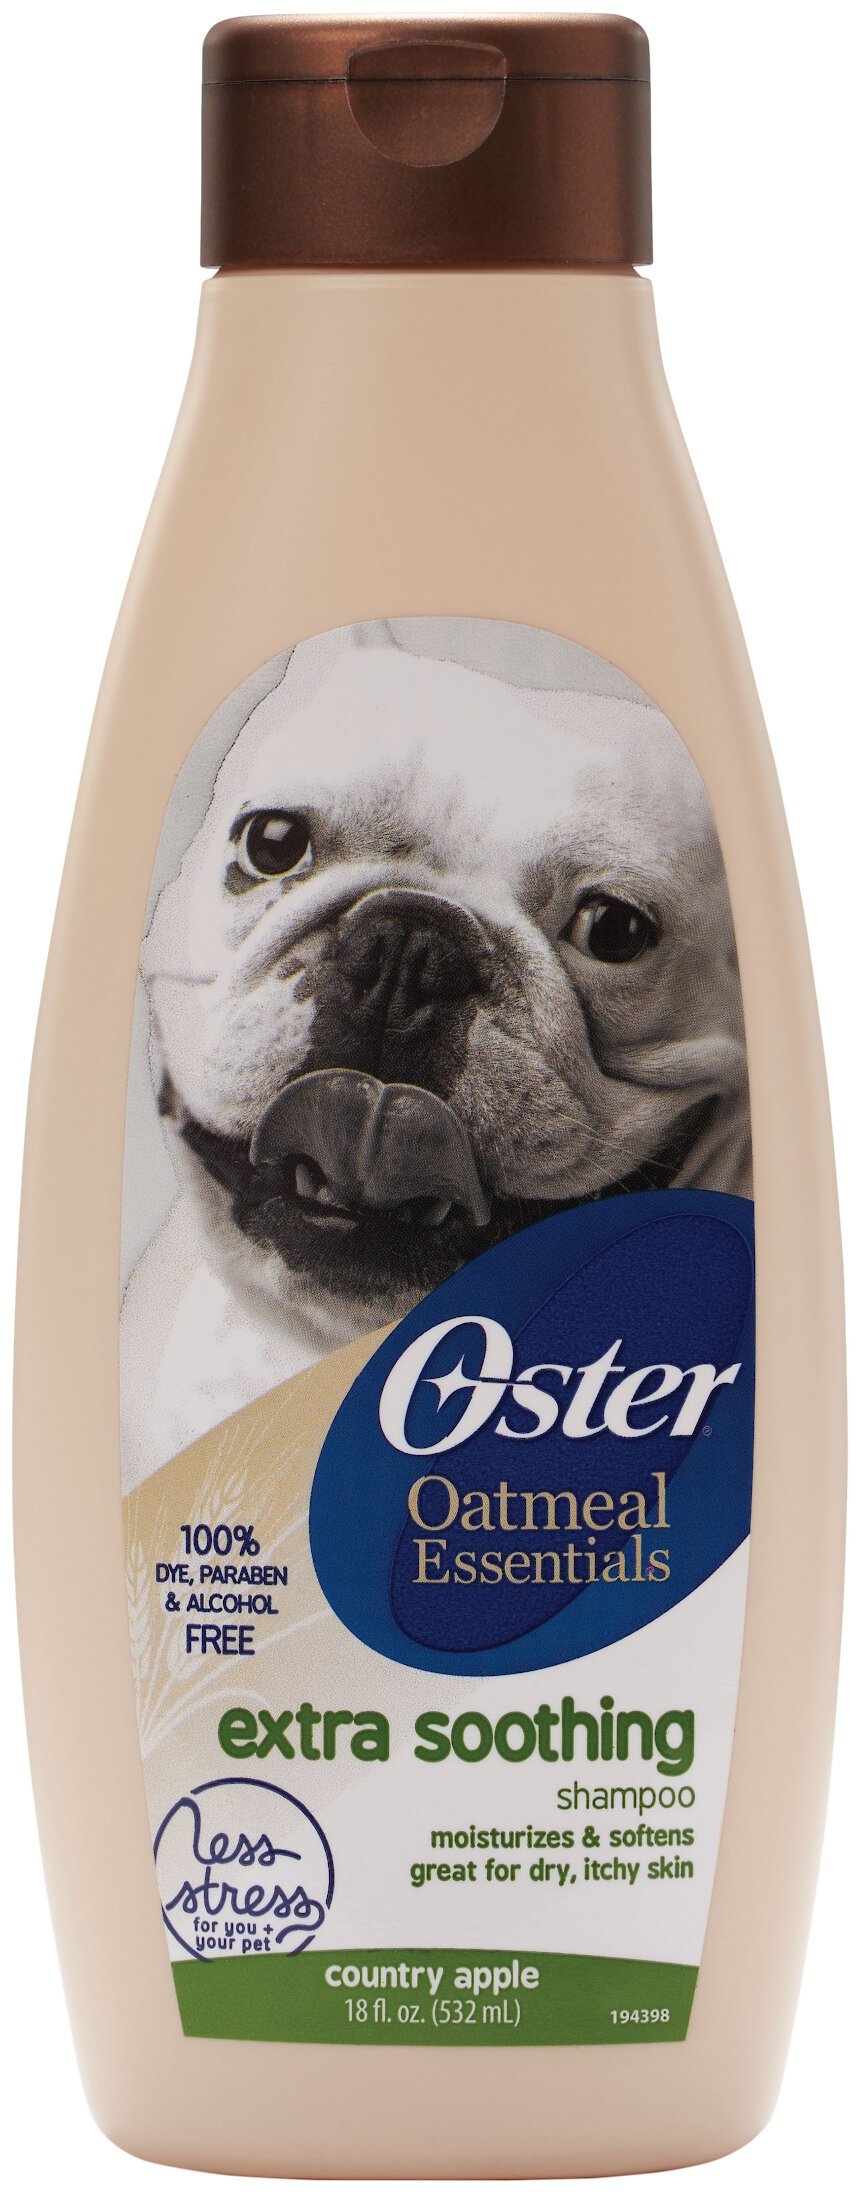 Oatmeal Essentials Extra Soothing Dog Shampoo